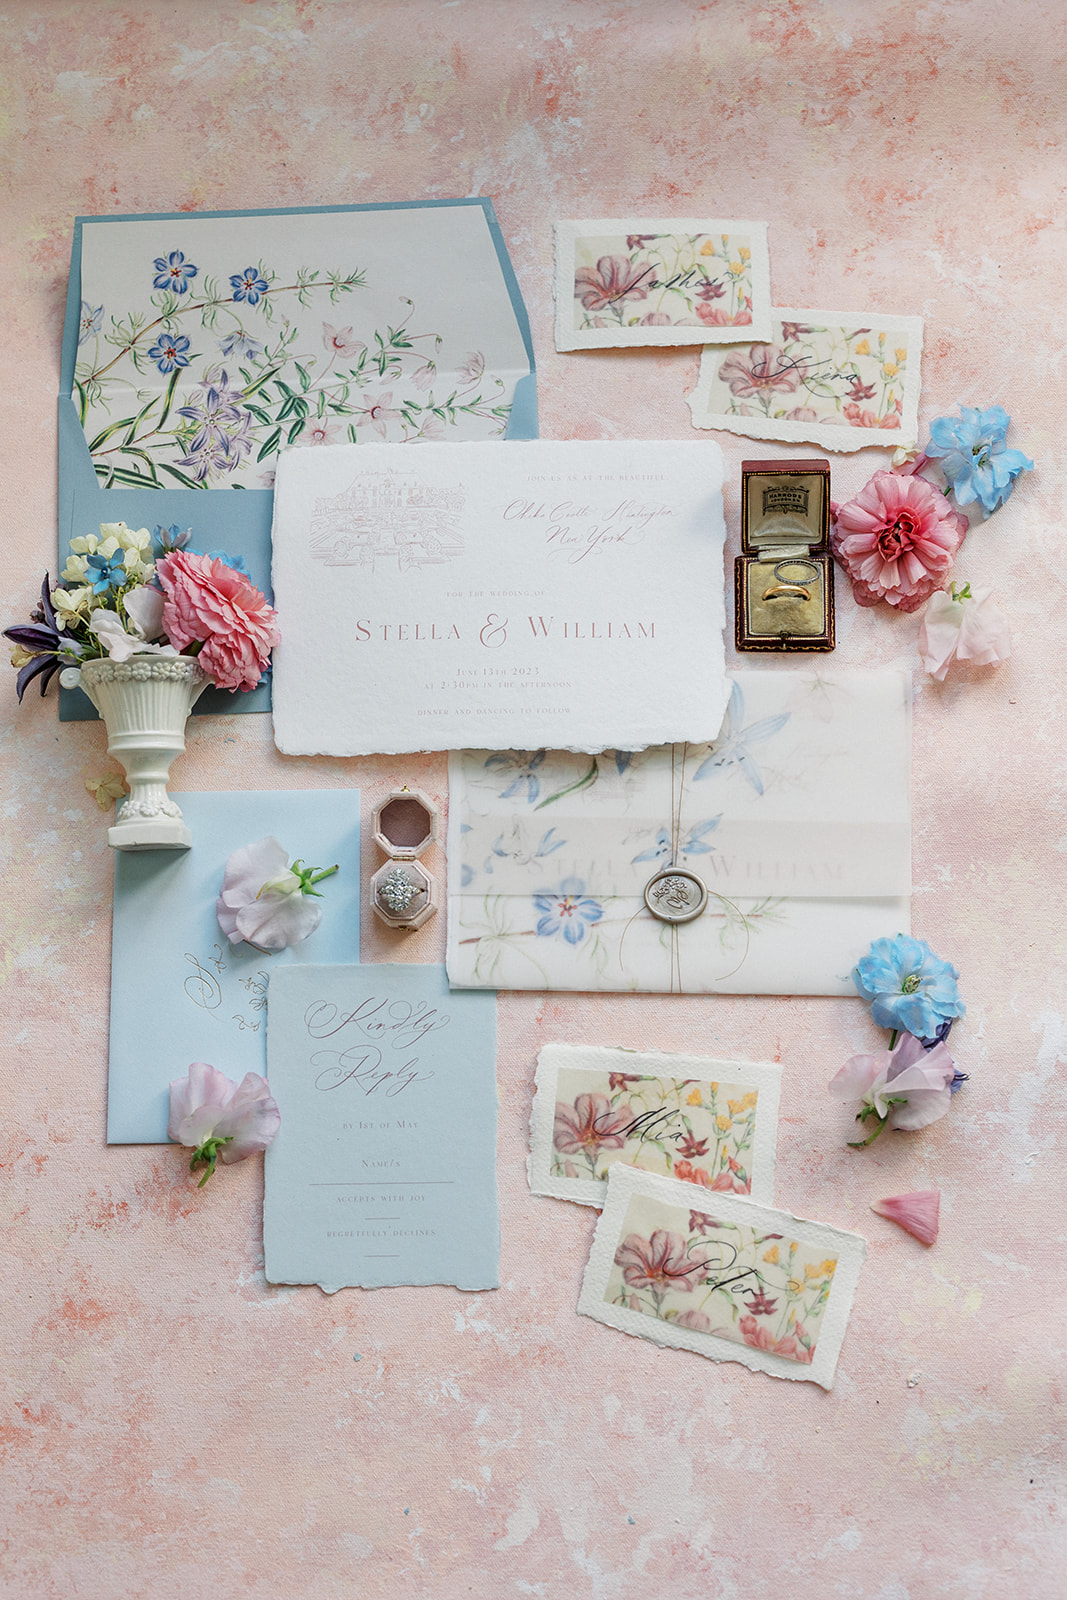 Details of a wedding invitation, rings, flowers and save the date sit on a pink table